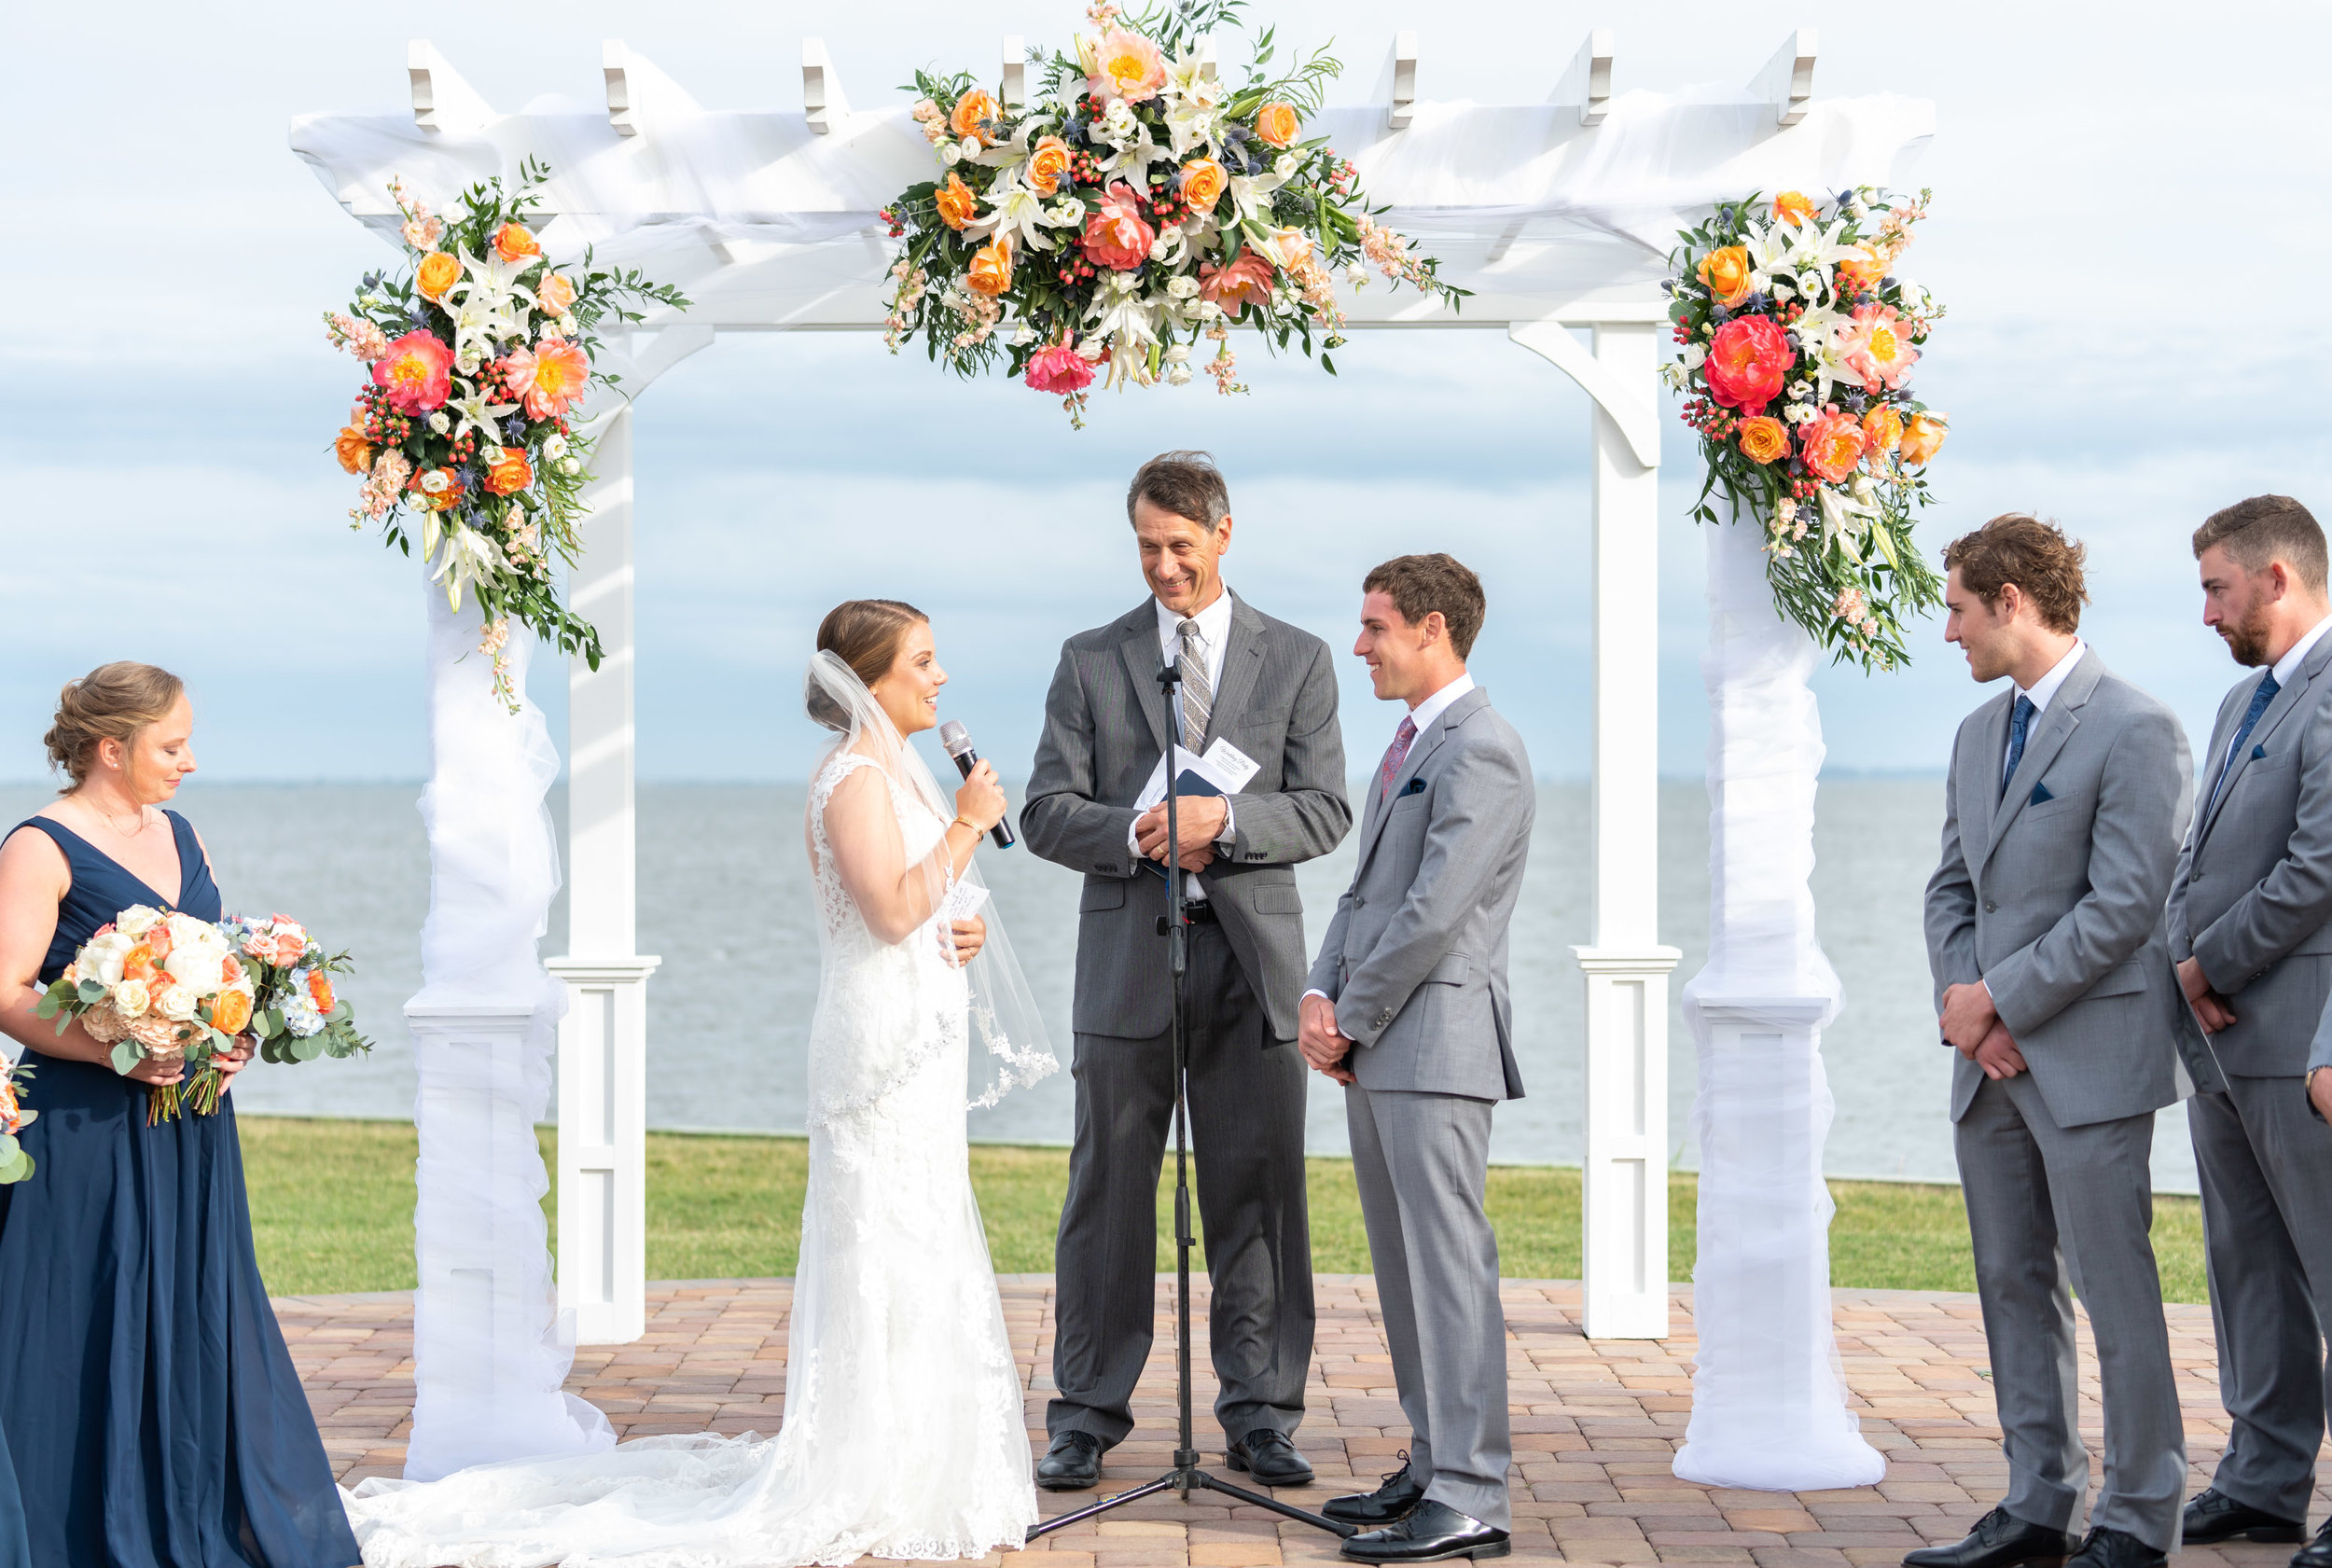 Rehoboth Beach Country Club waterfront wedding in Delaware 